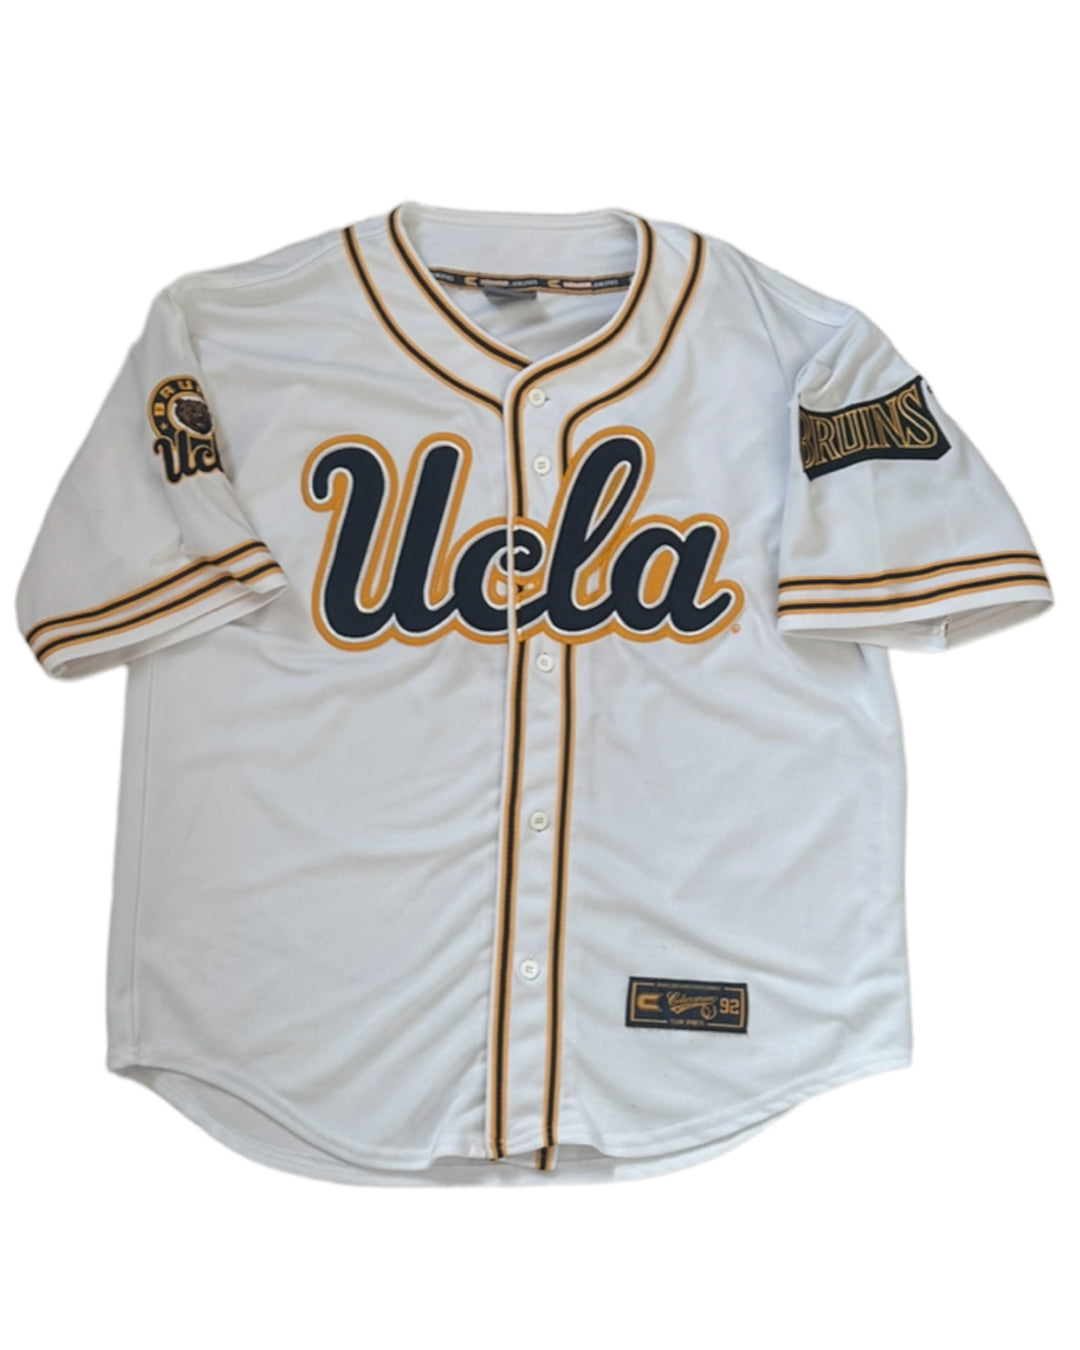 UCLA Vintage Jersey – Roadie Couture